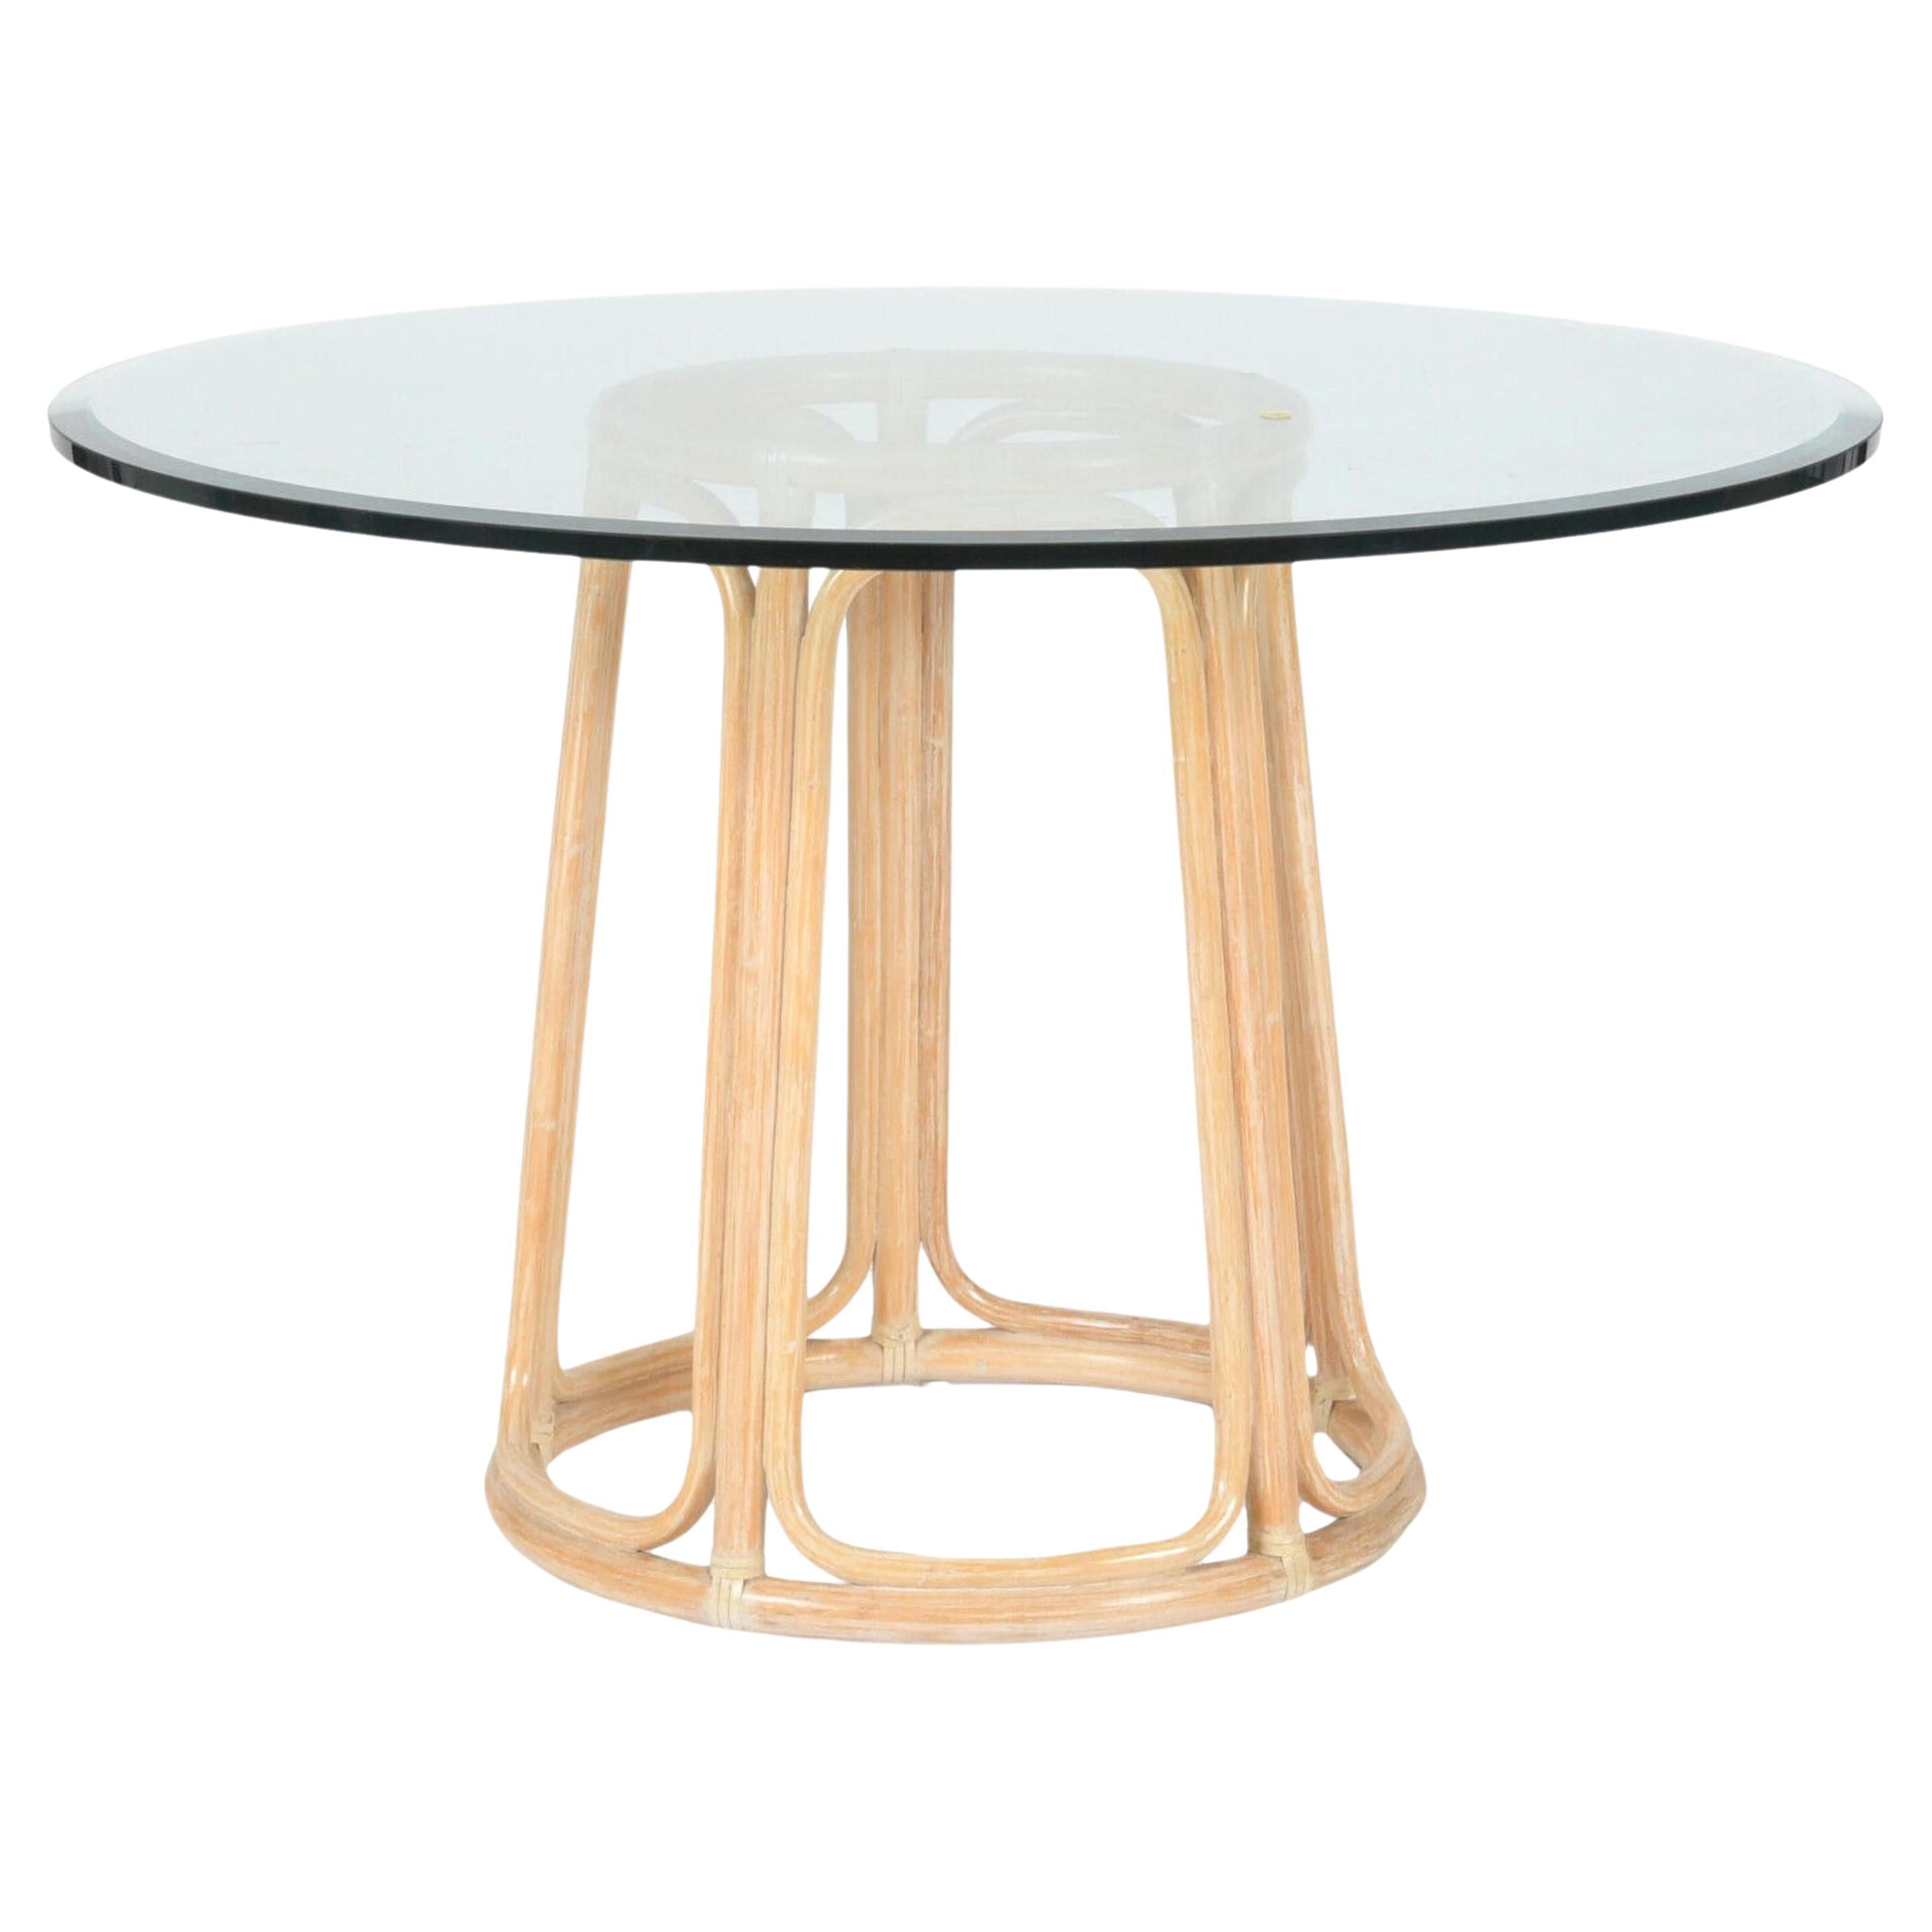 McGuire Organic Modern Round Glass and Rattan Pedestal Dining Table For Sale